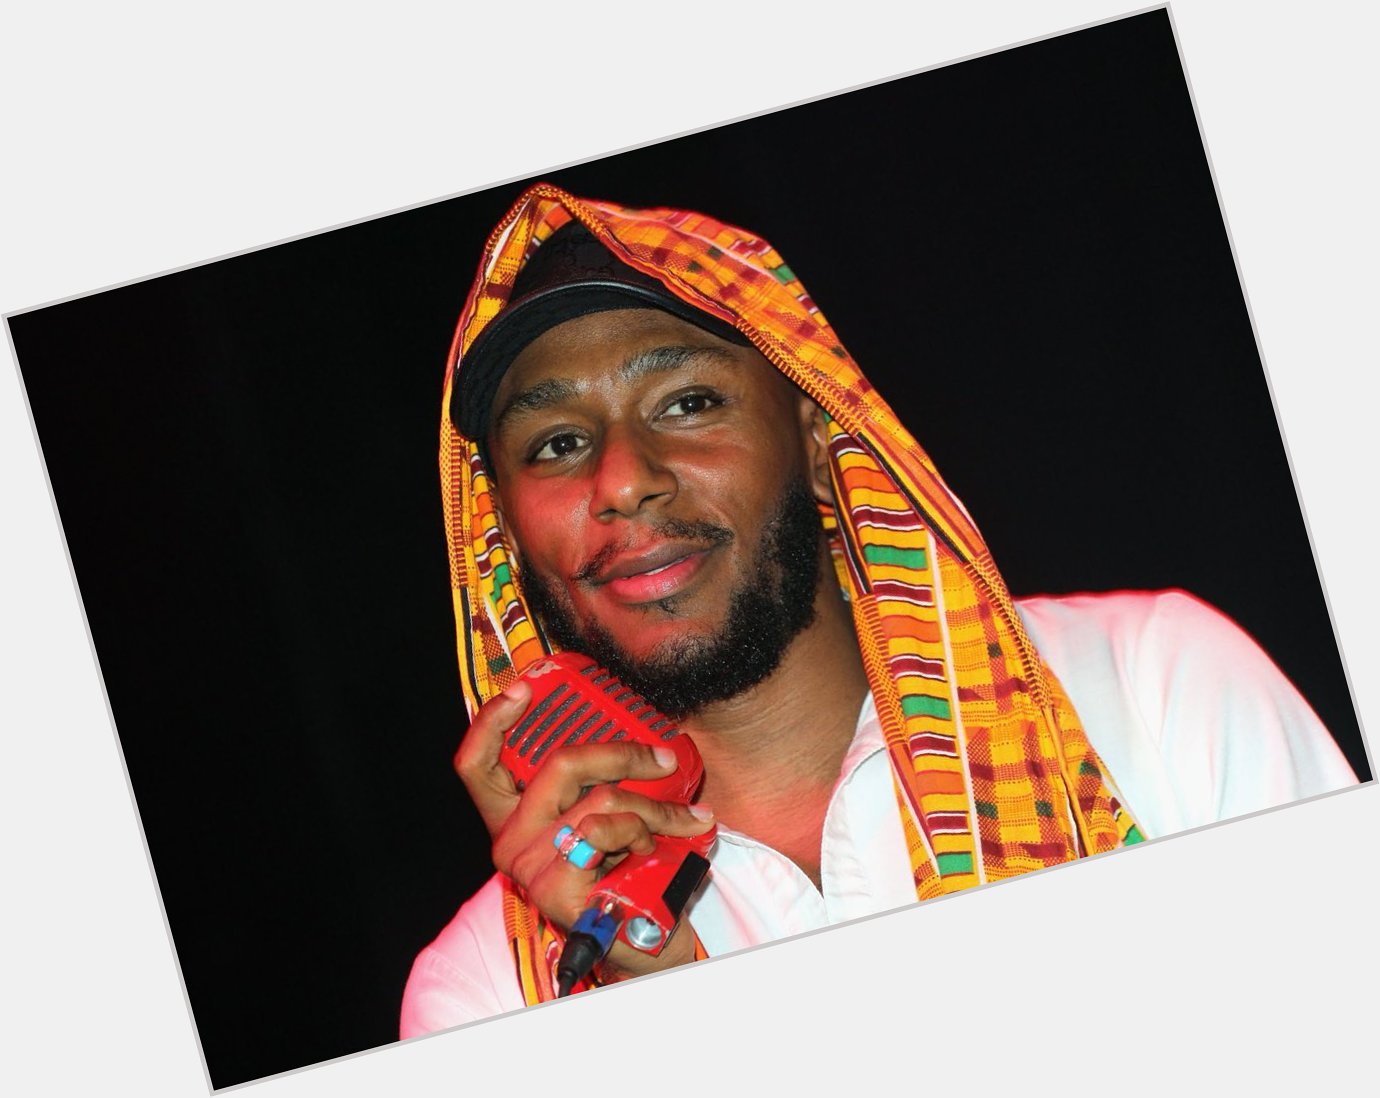 Happy birthday Yasiin Bey fka Mos Def

One of the greatest of all time, such an inspiration 